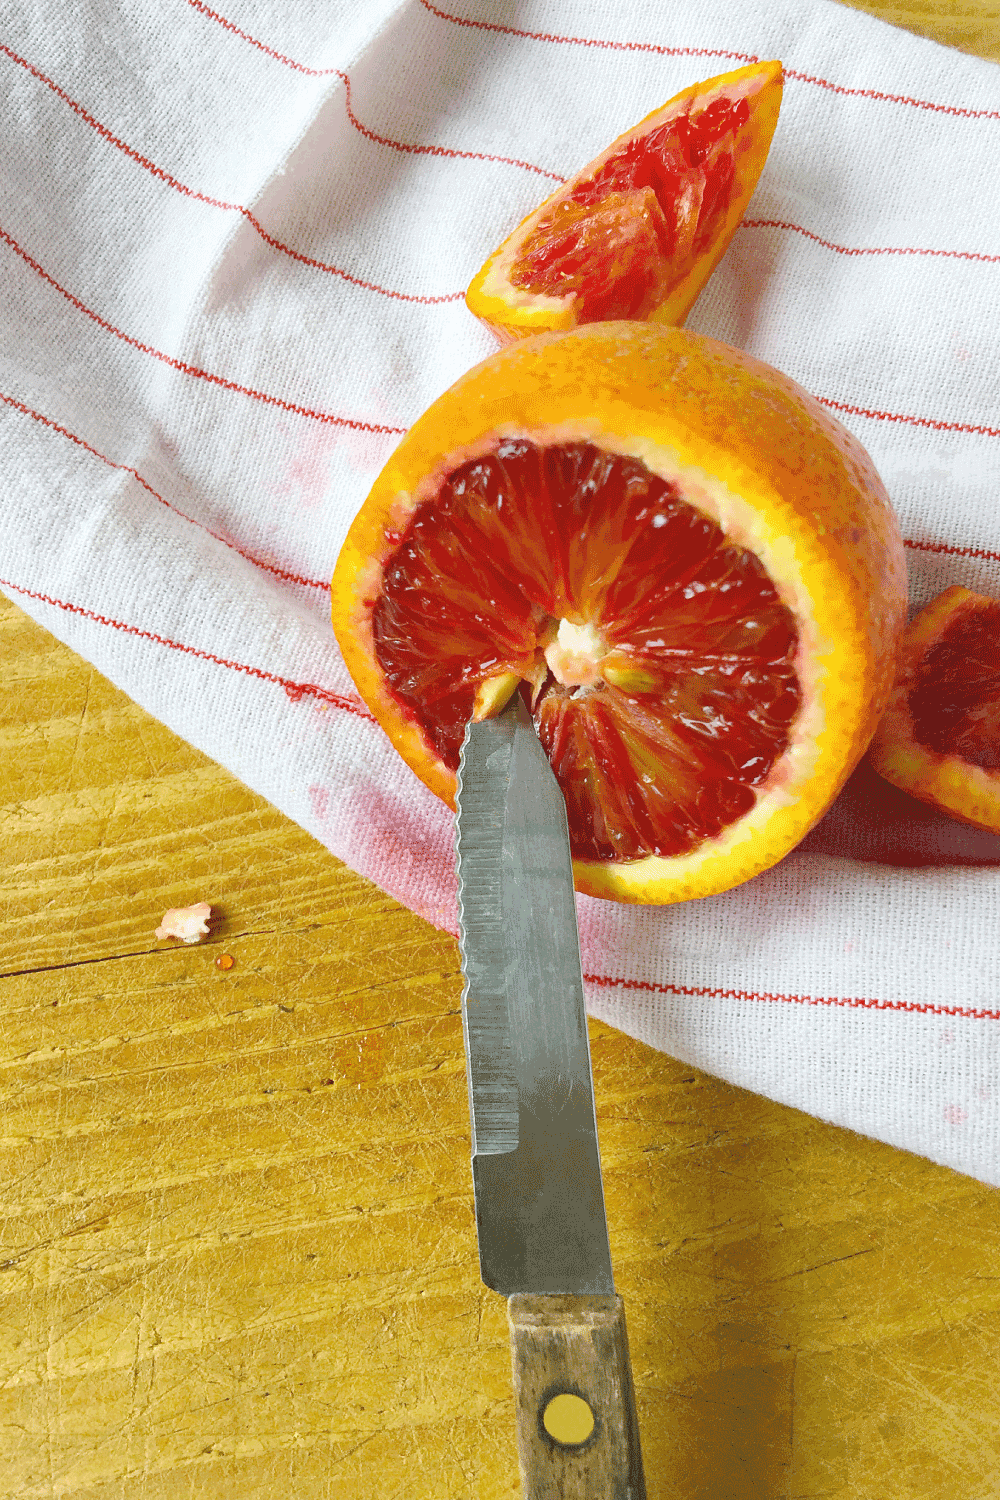 Using a knife tip to take out a seed from citrus fruit